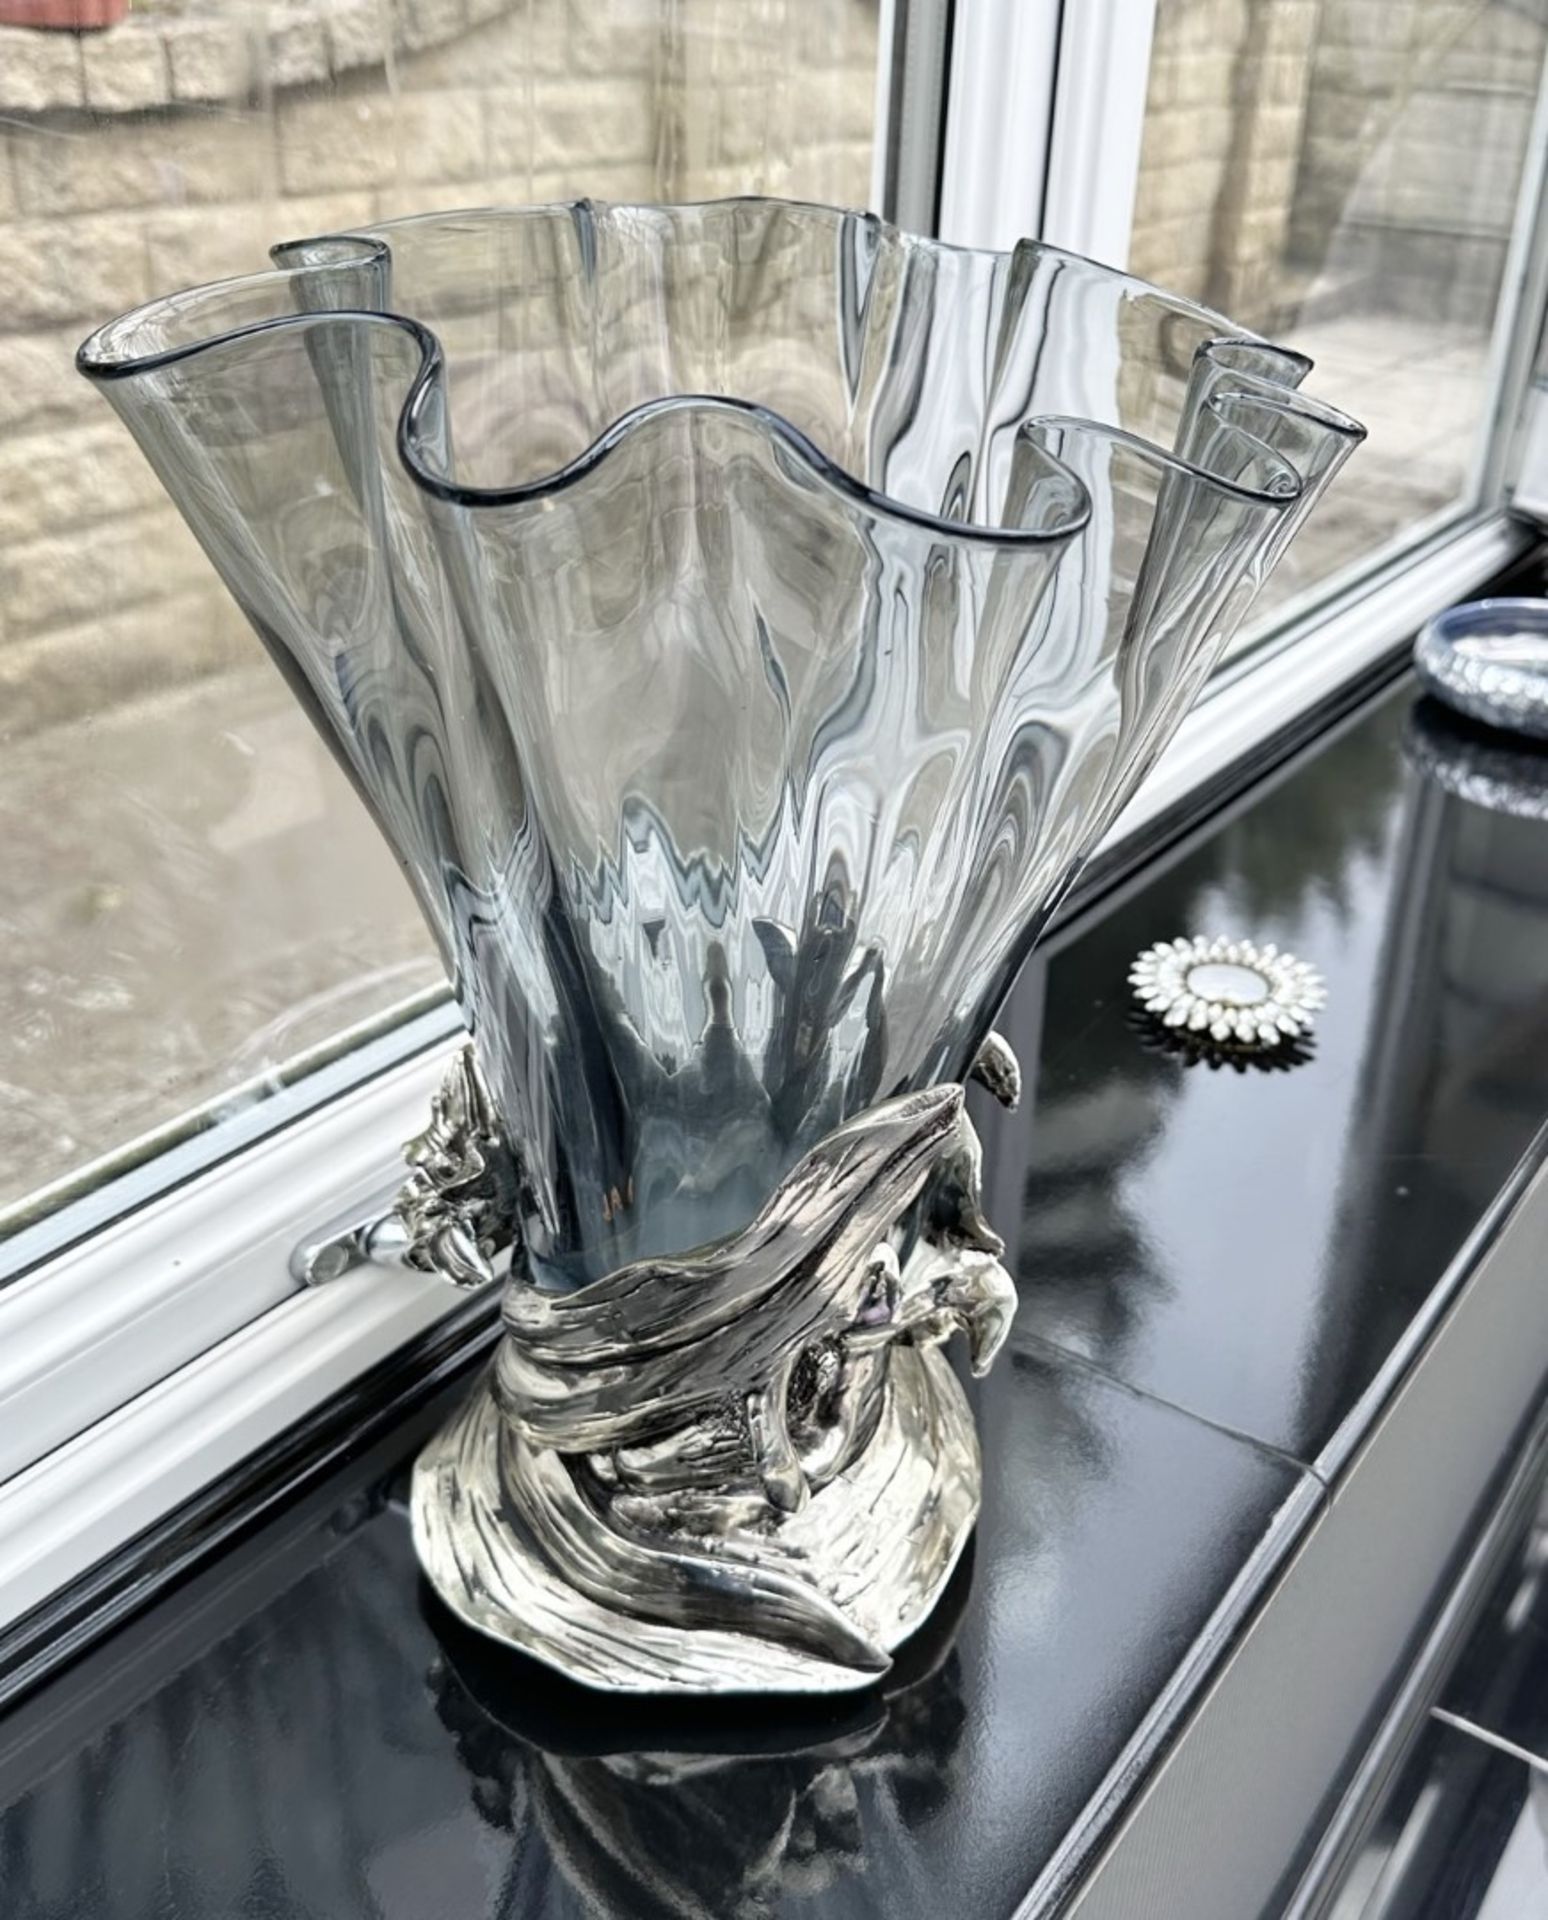 1 x Crystal Glass Vase With Floral Design Metal Base And Diamante Detailing - Image 3 of 3